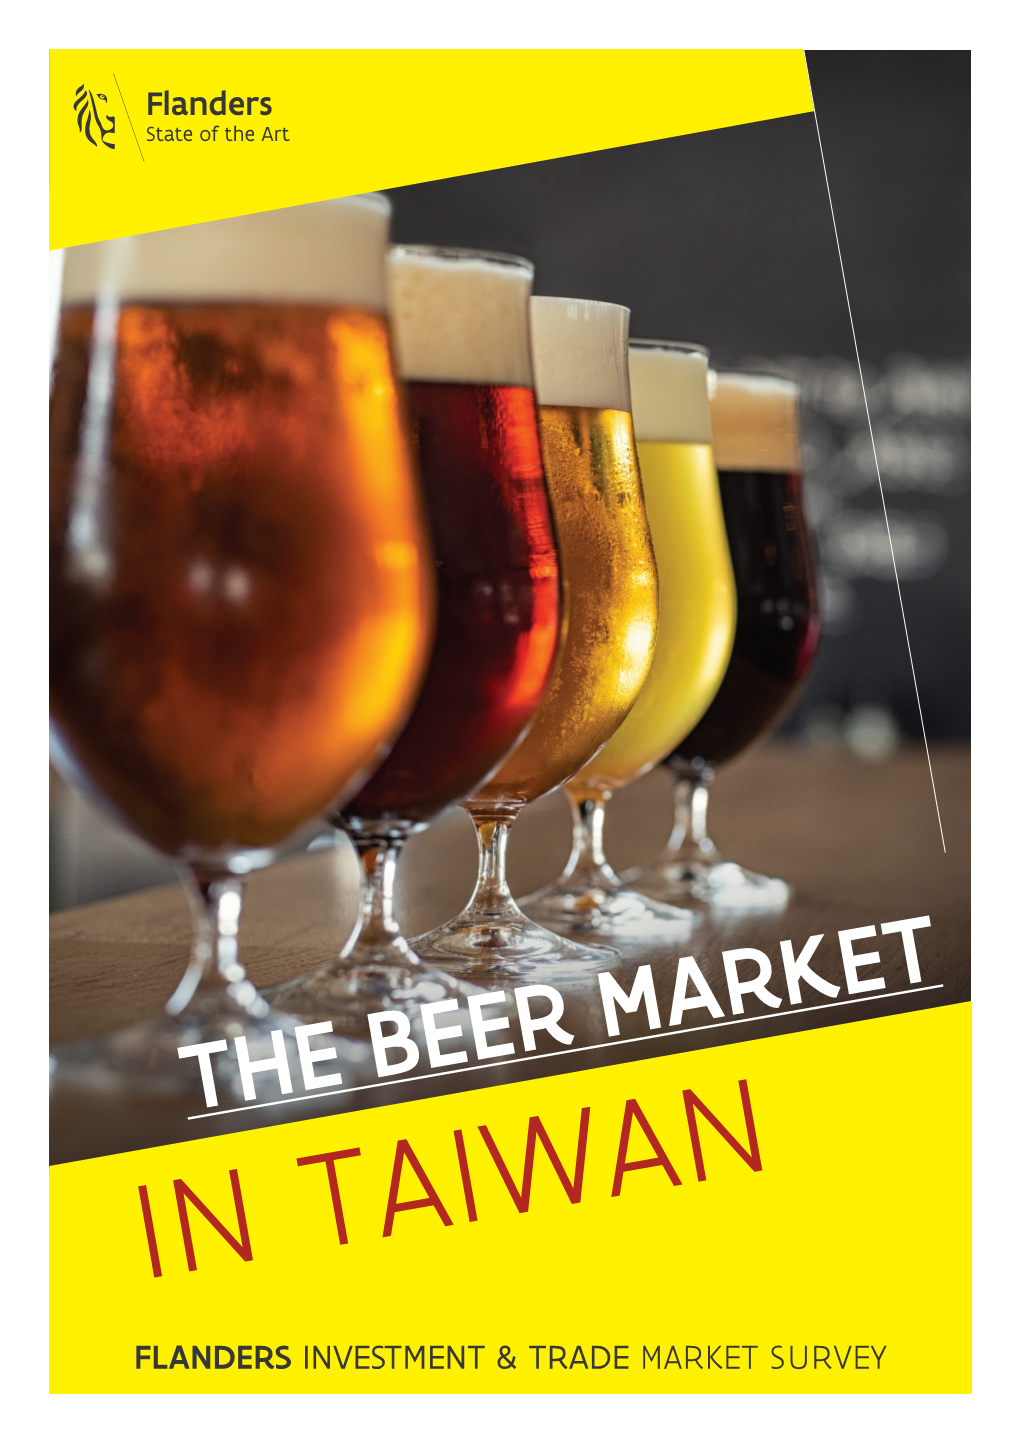 THE TAIWAN BEER MARKET Publication Date: 10.08.2021